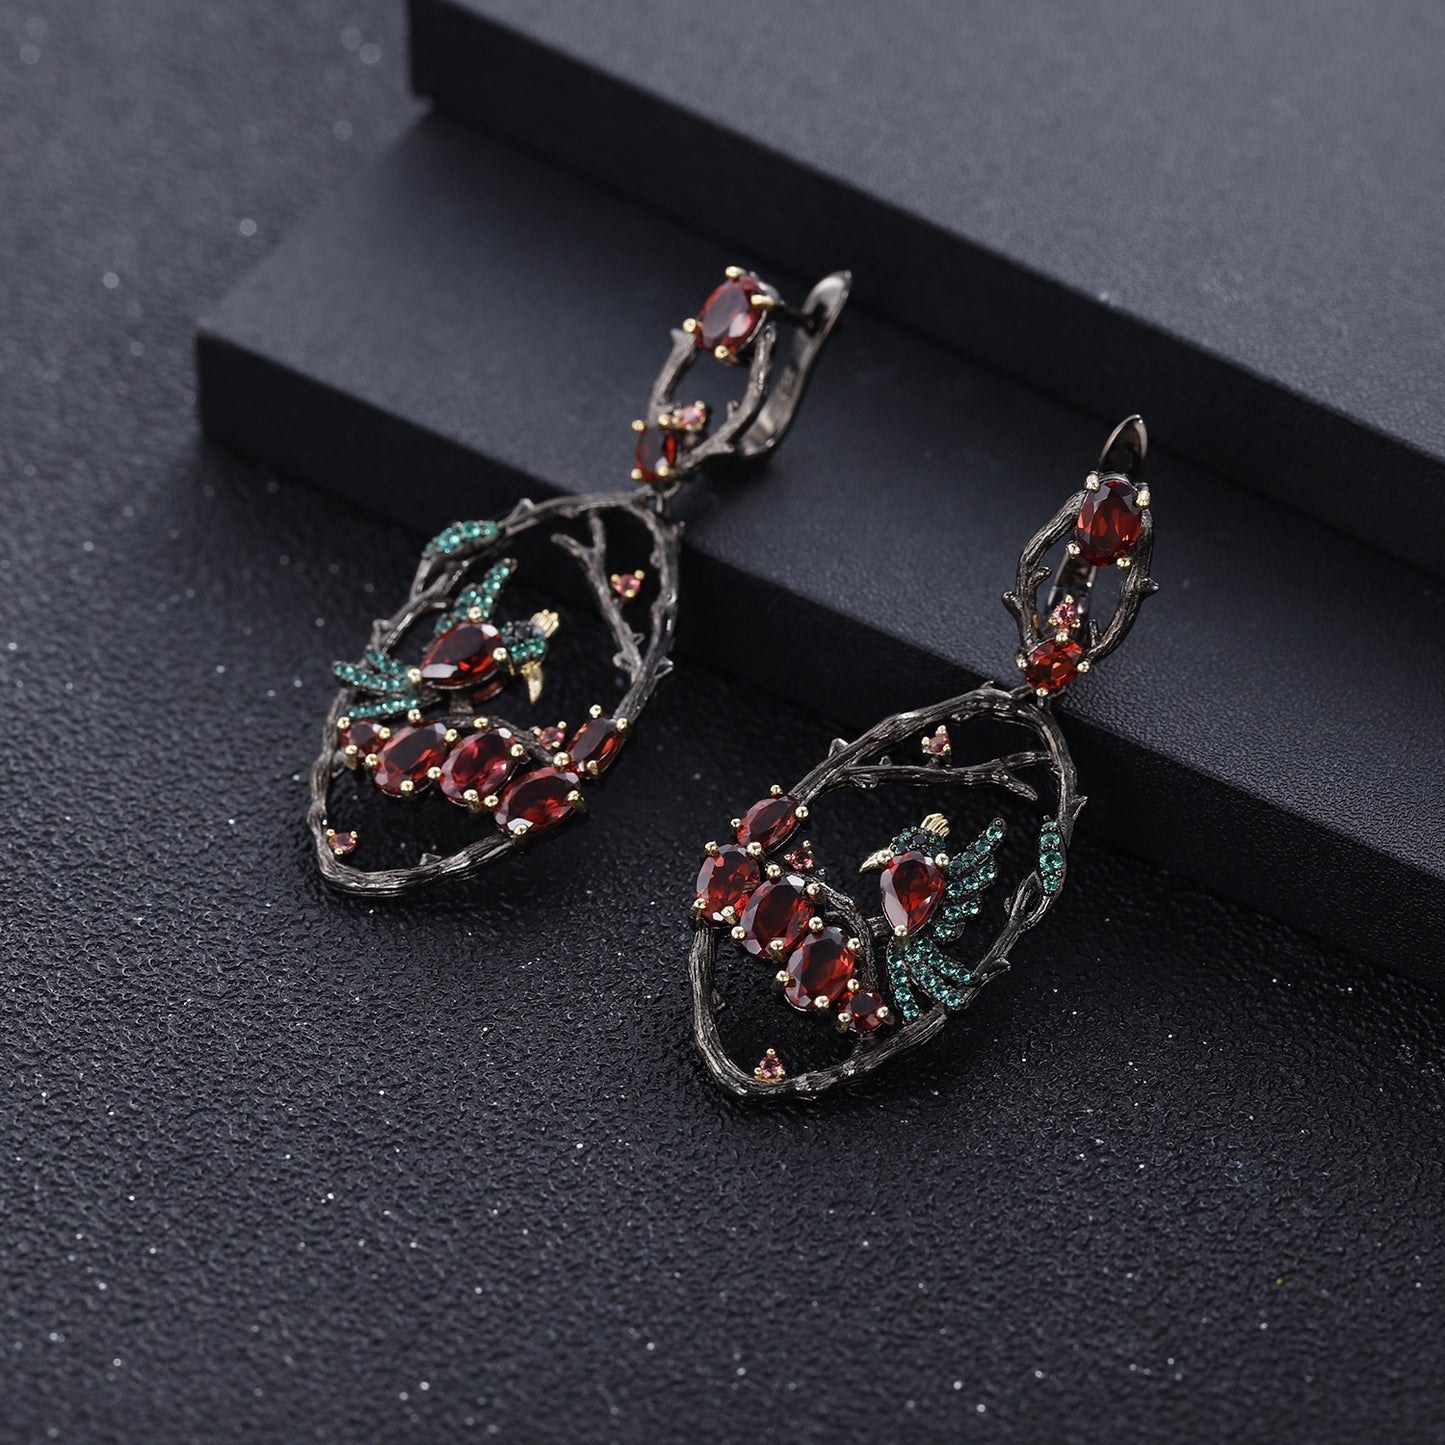 Birds in the Bush 925 SiIver Natural Gemstone Drop Earrings for Women